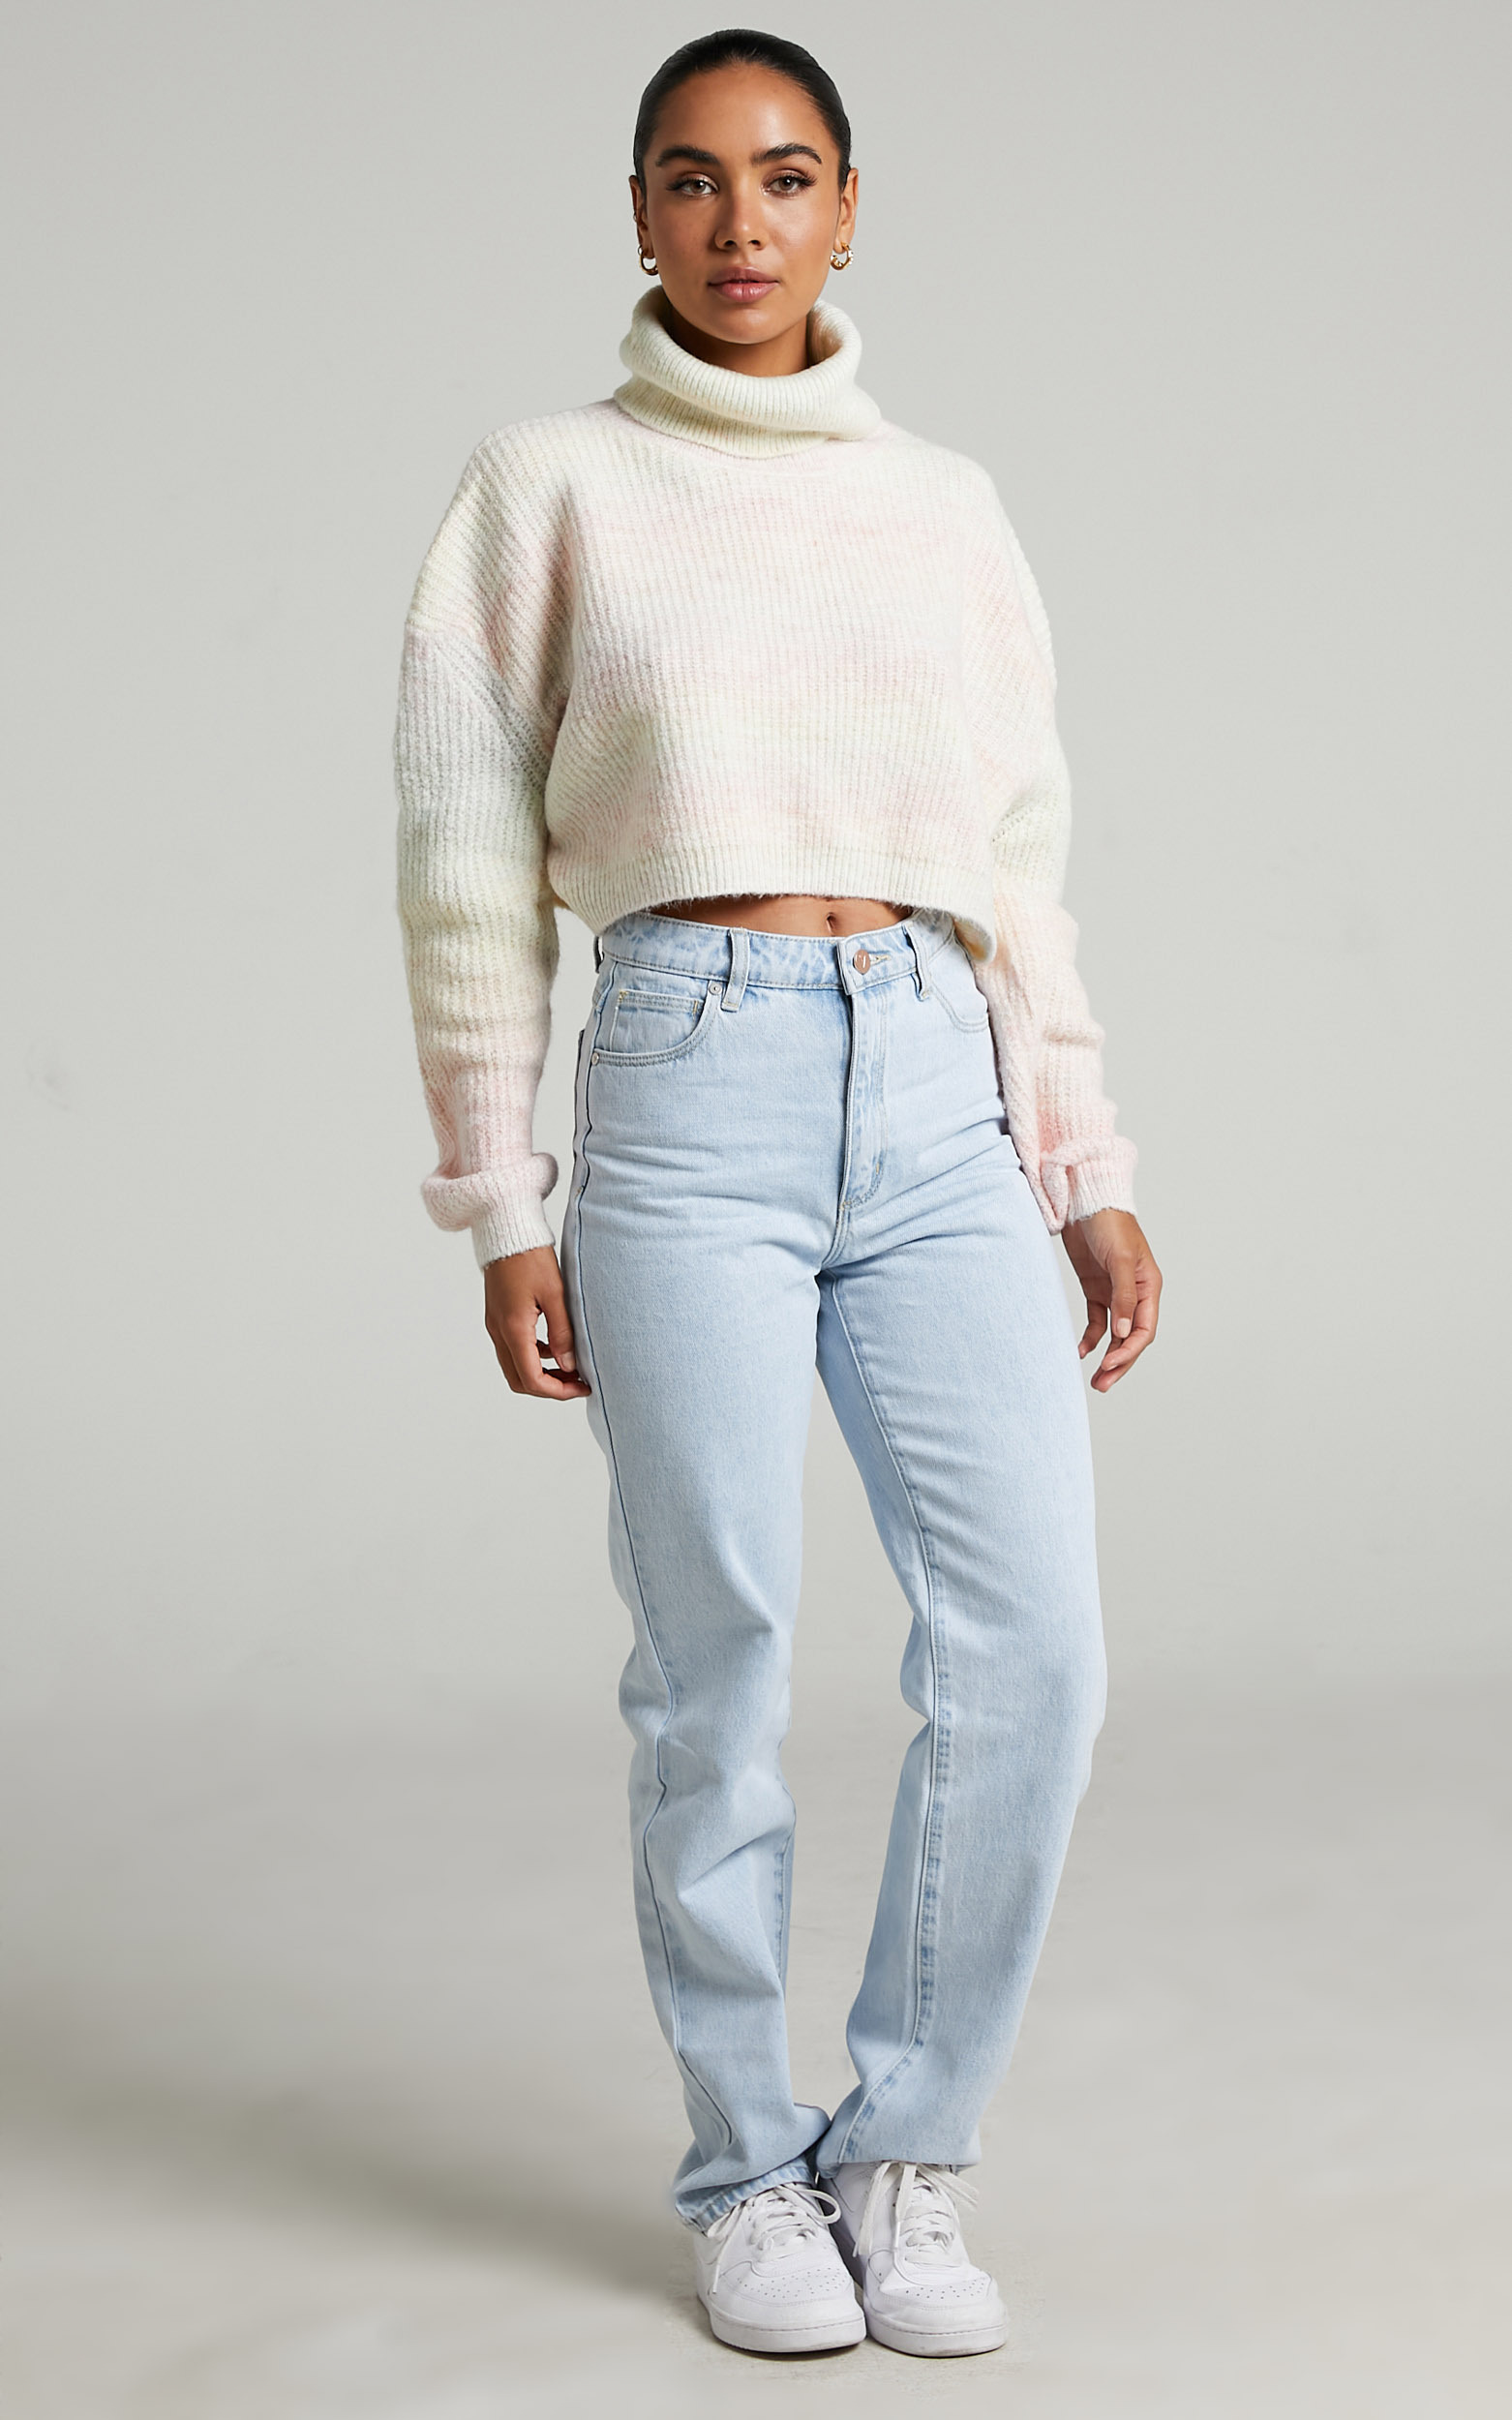 Maureen Cropped Turtle Neck Knit Sweater in Pink Multi - M/L, PNK1, hi-res image number null